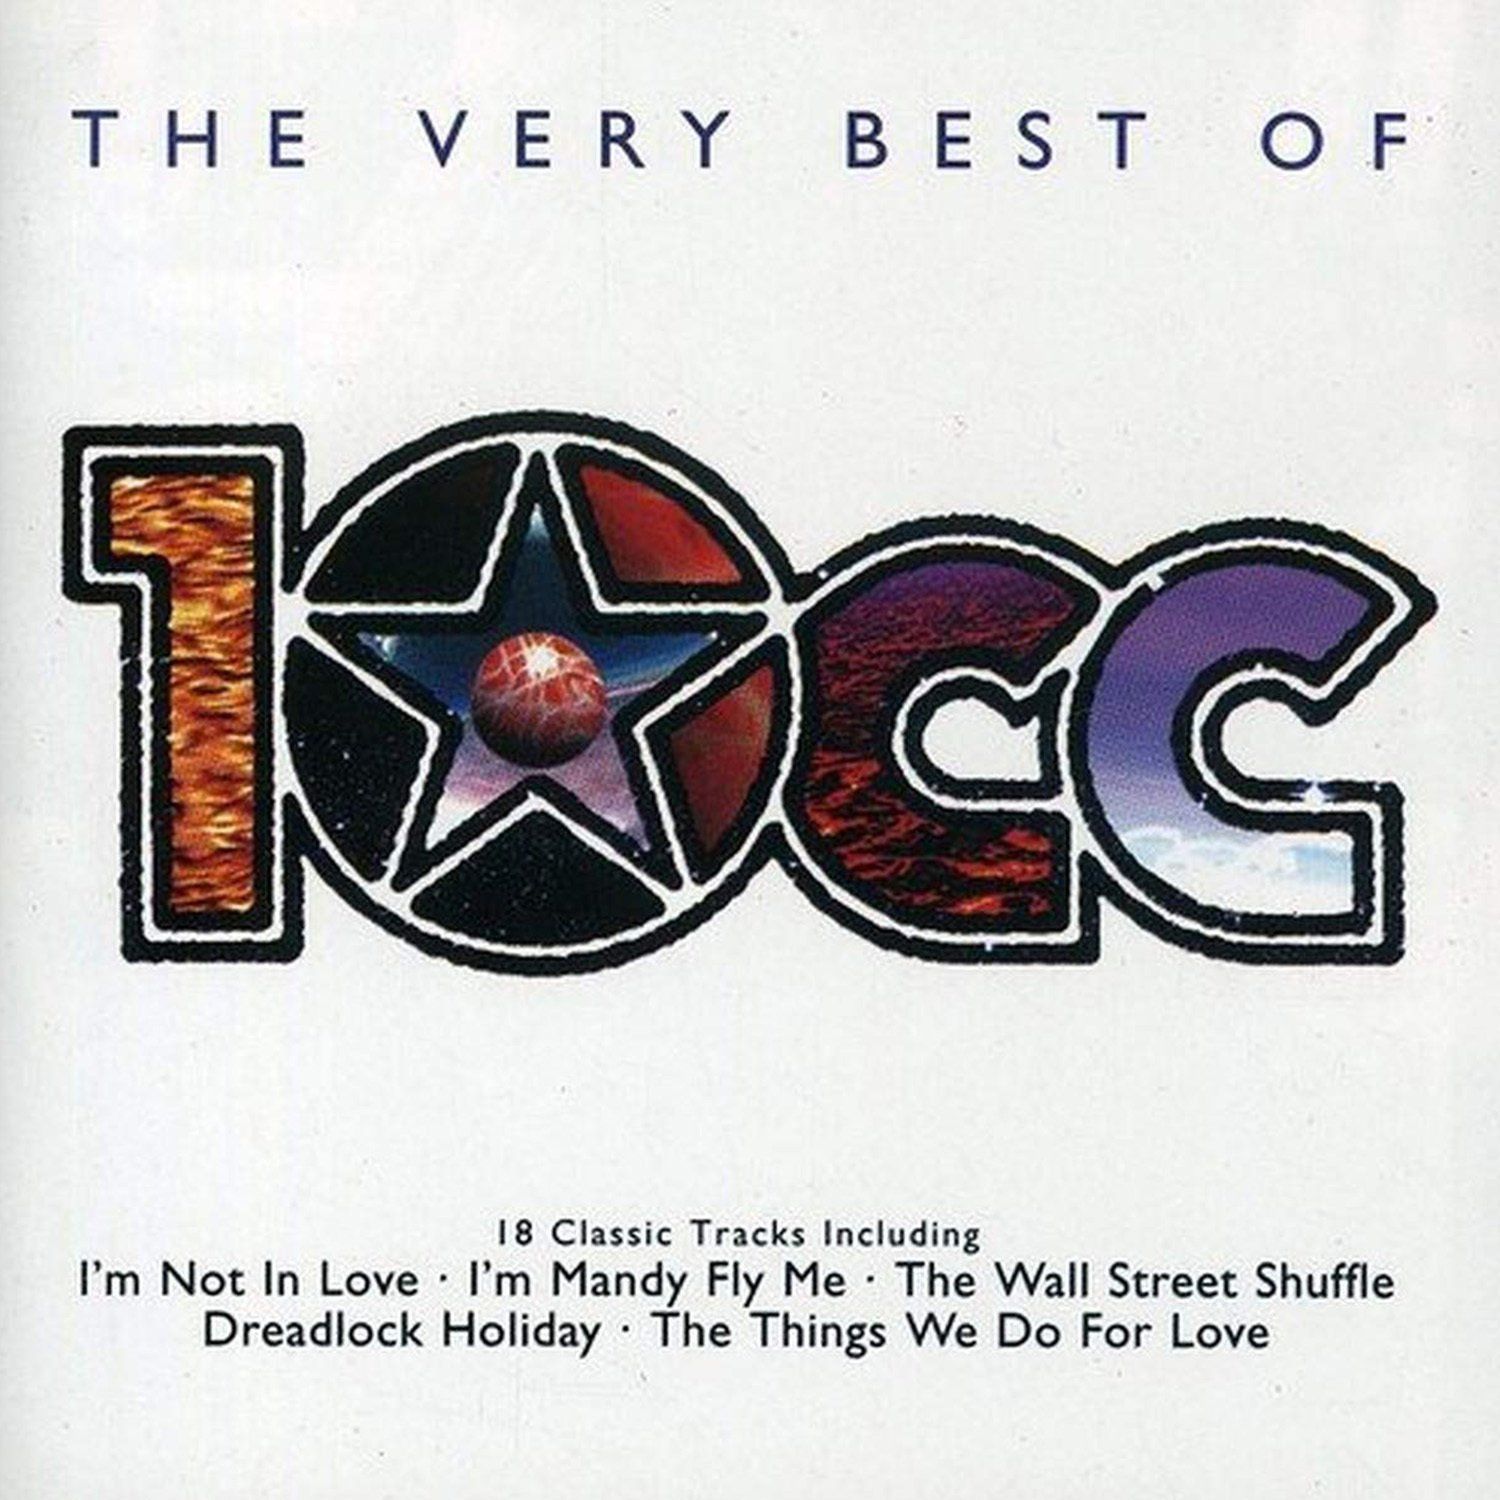 THE VERY BEST OF 10CC